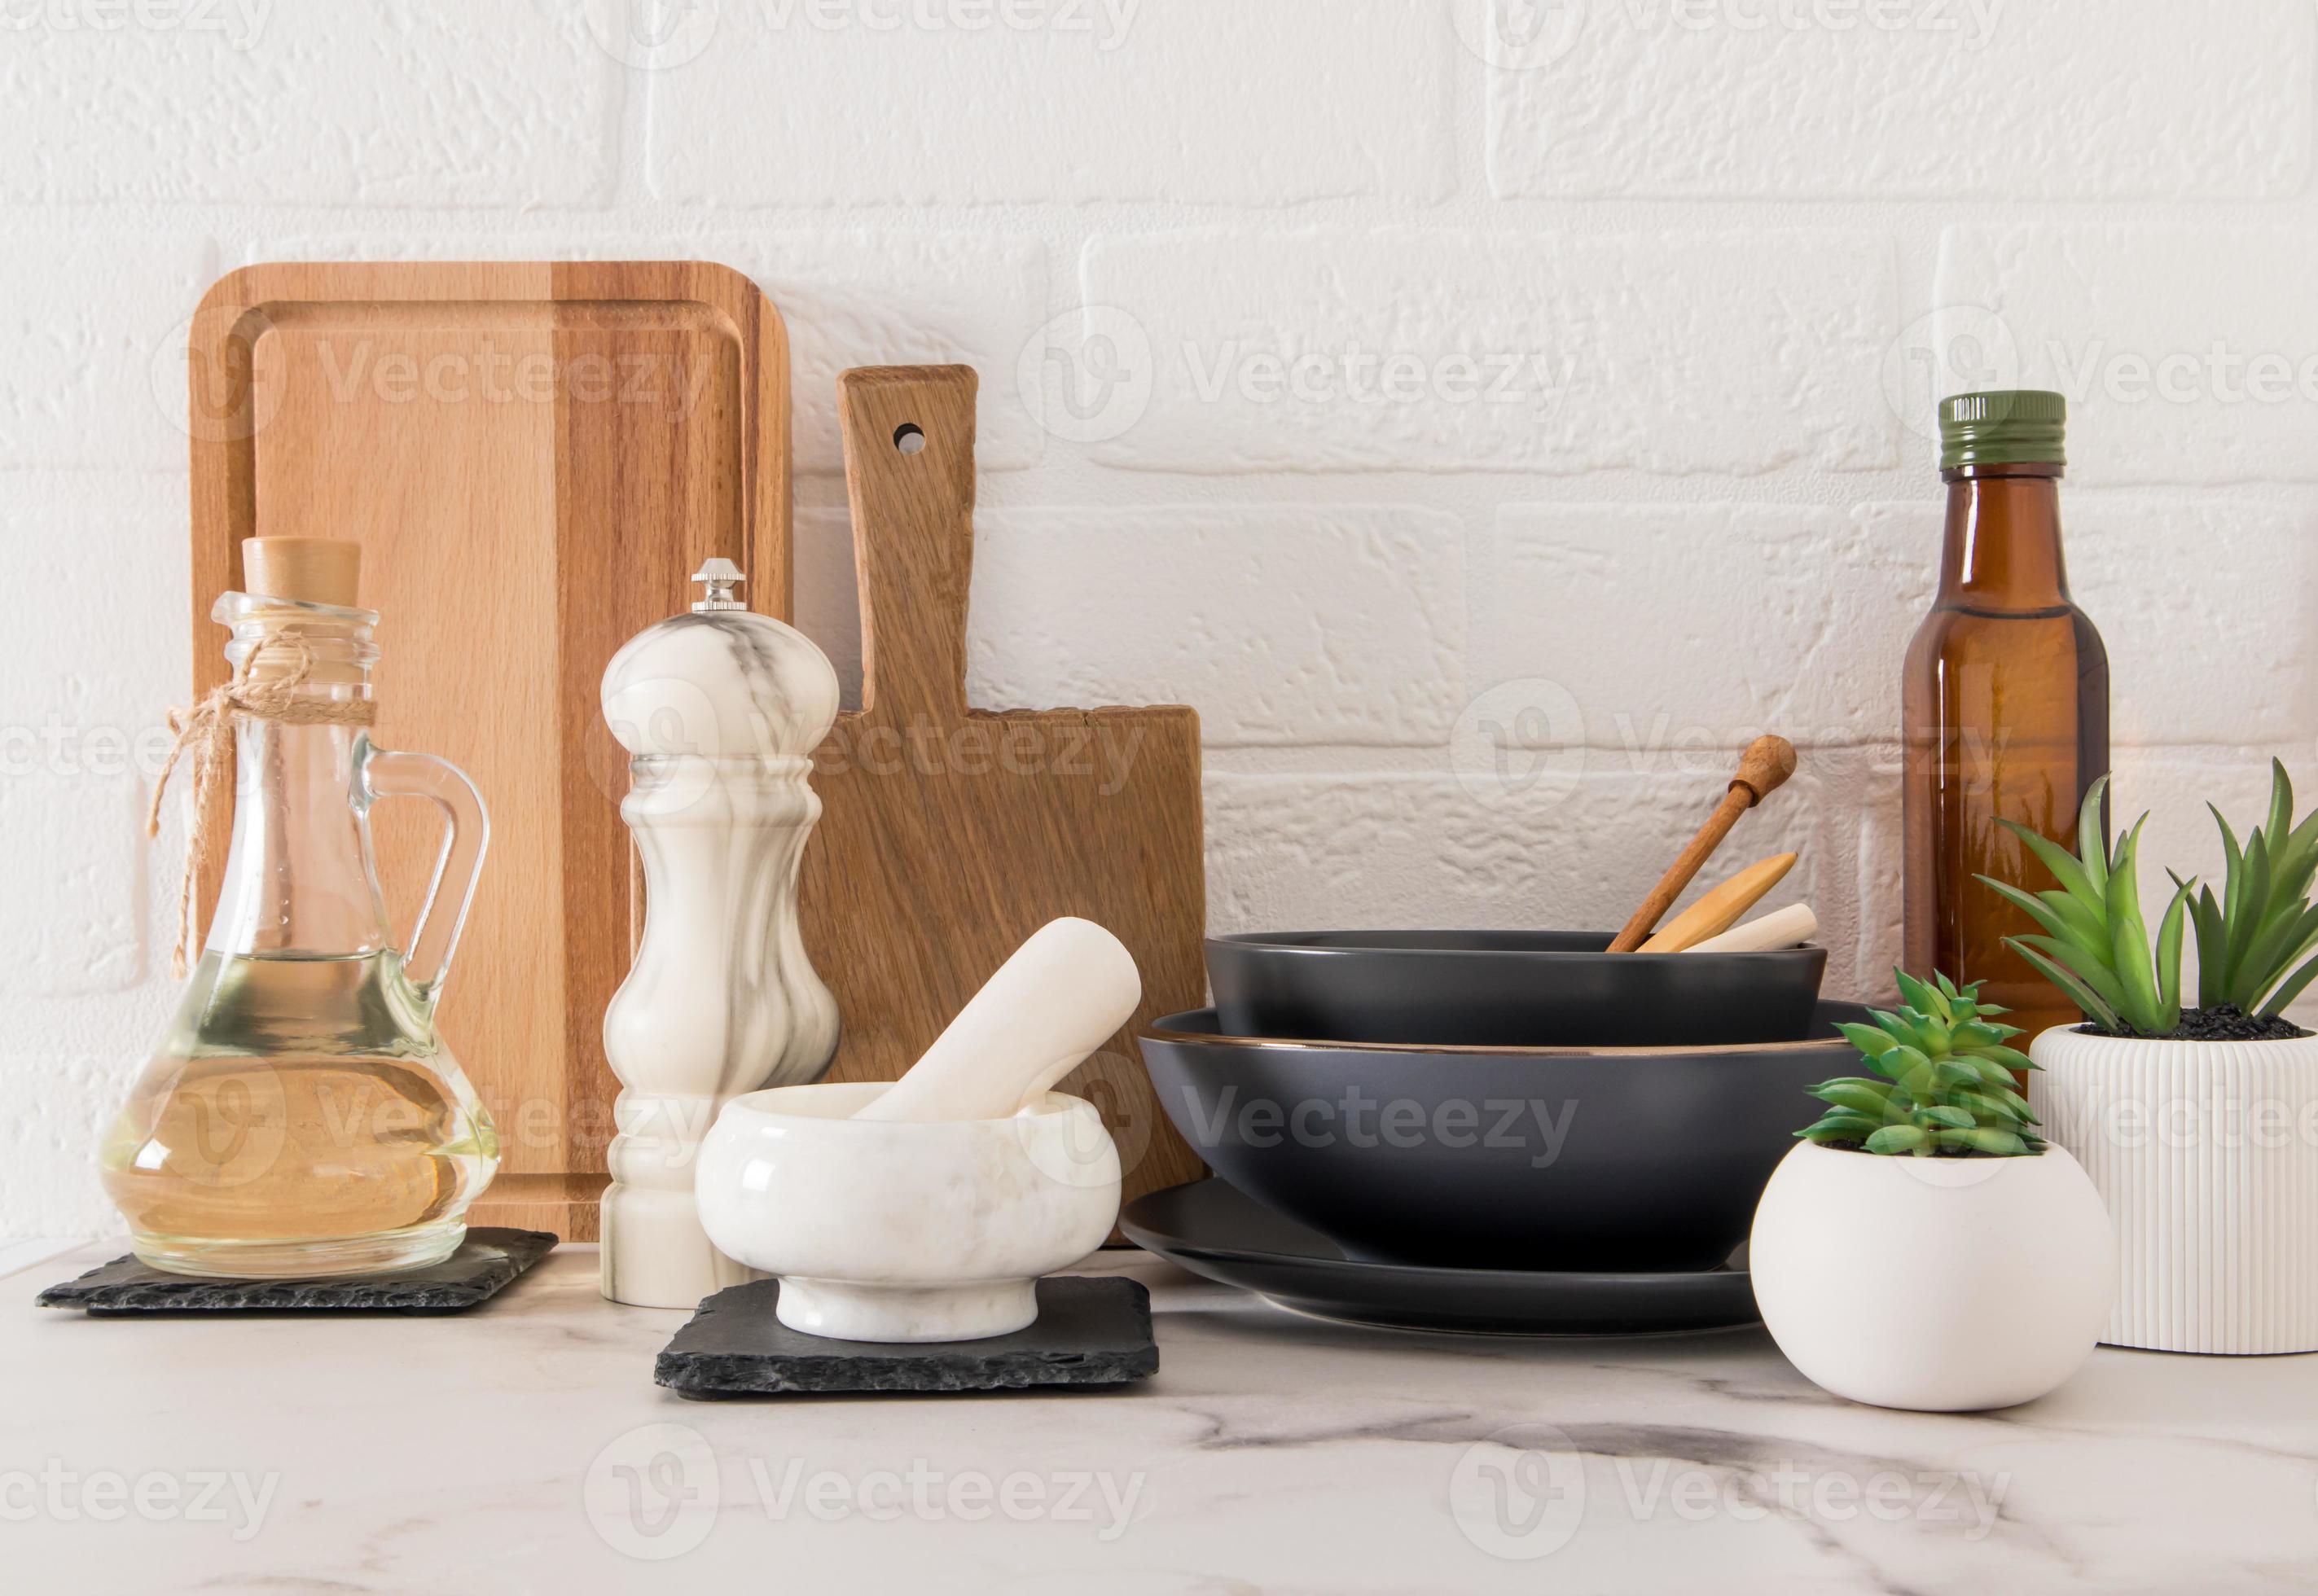 https://static.vecteezy.com/system/resources/previews/012/875/435/large_2x/a-set-of-various-modern-kitchen-utensils-on-a-marble-countertop-against-a-white-brick-wall-eco-friendly-materials-without-plastic-photo.jpg